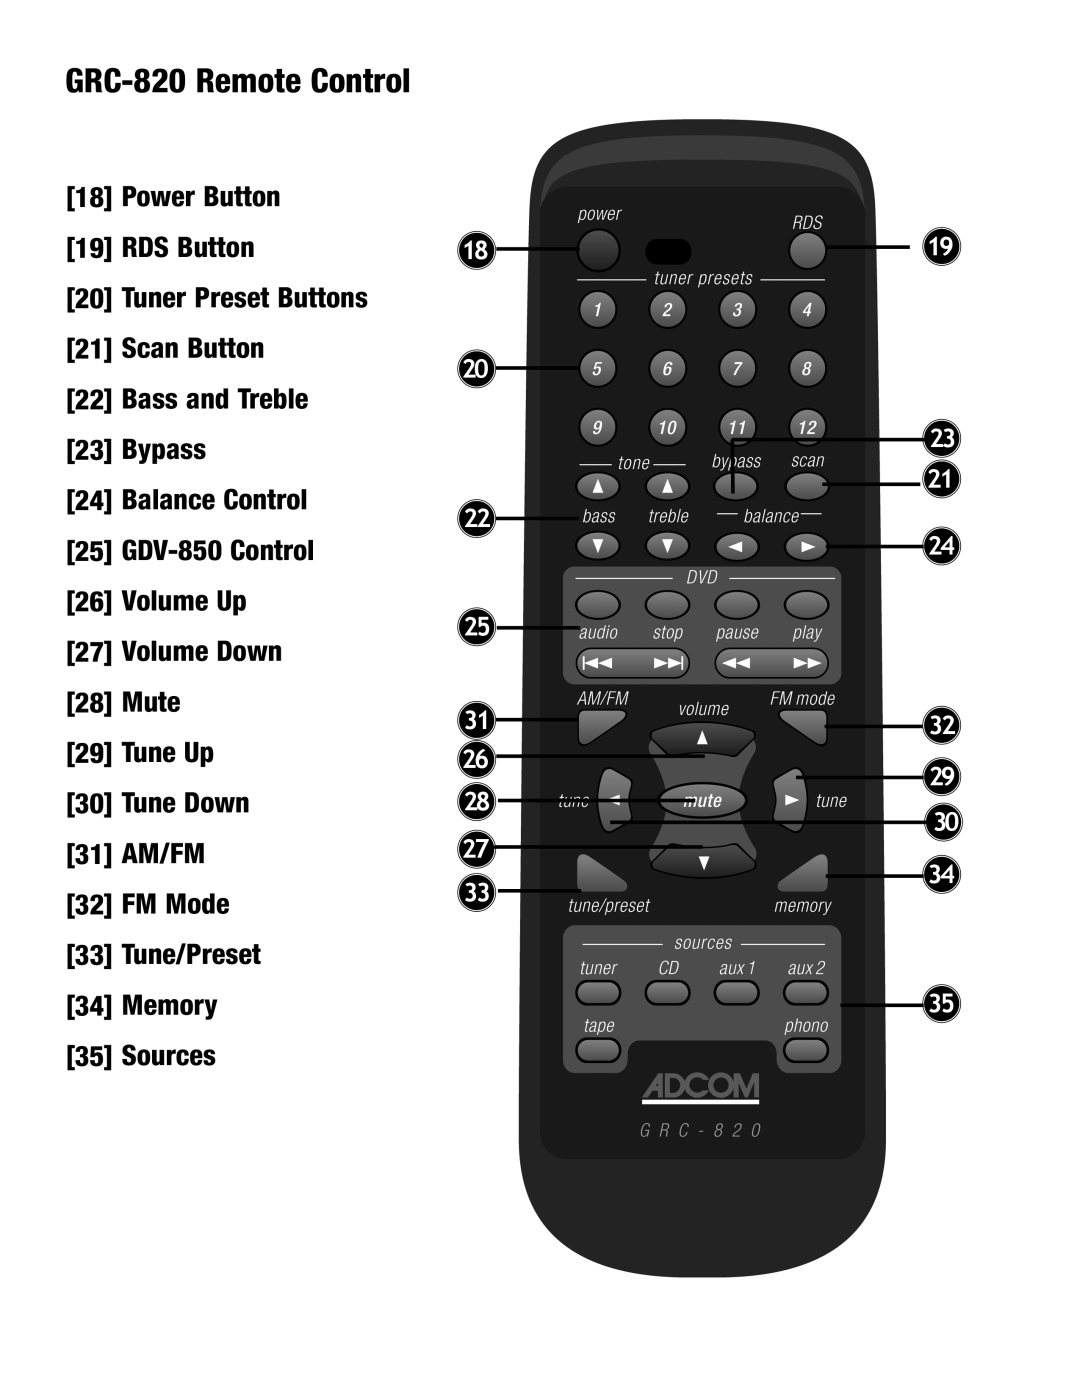 Adcom GTP-602 manual GRC-820Remote Control, Power Button 19 RDS Button, Tuner Preset Buttons 21 Scan Button, 18 20 22 